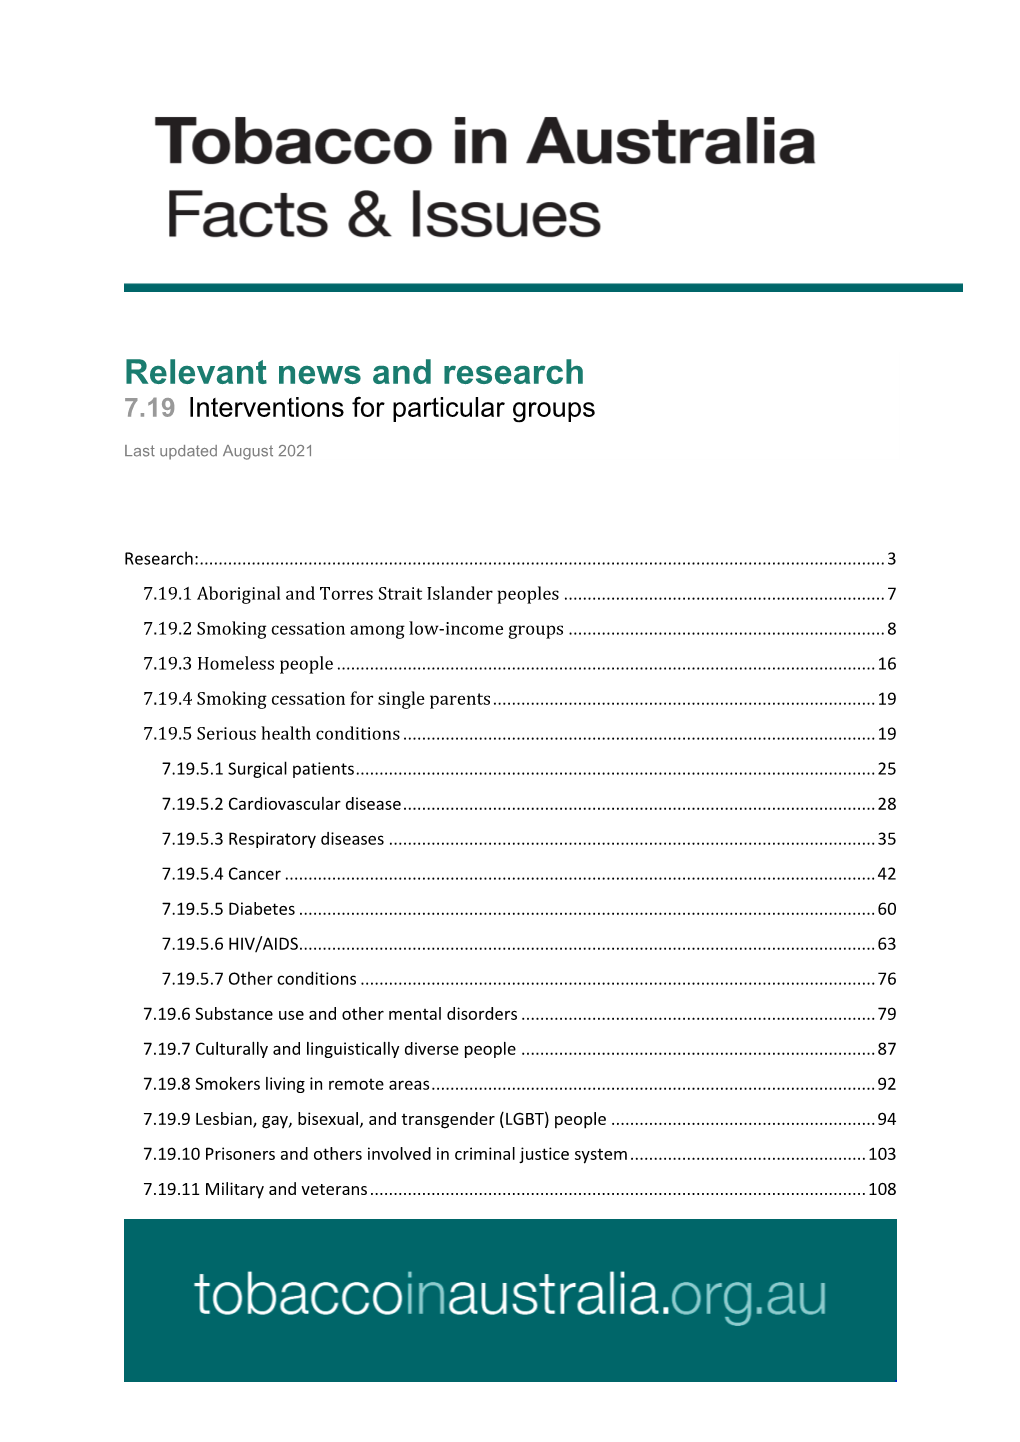 Relevant News and Research 7.19 Interventions for Particular Groups